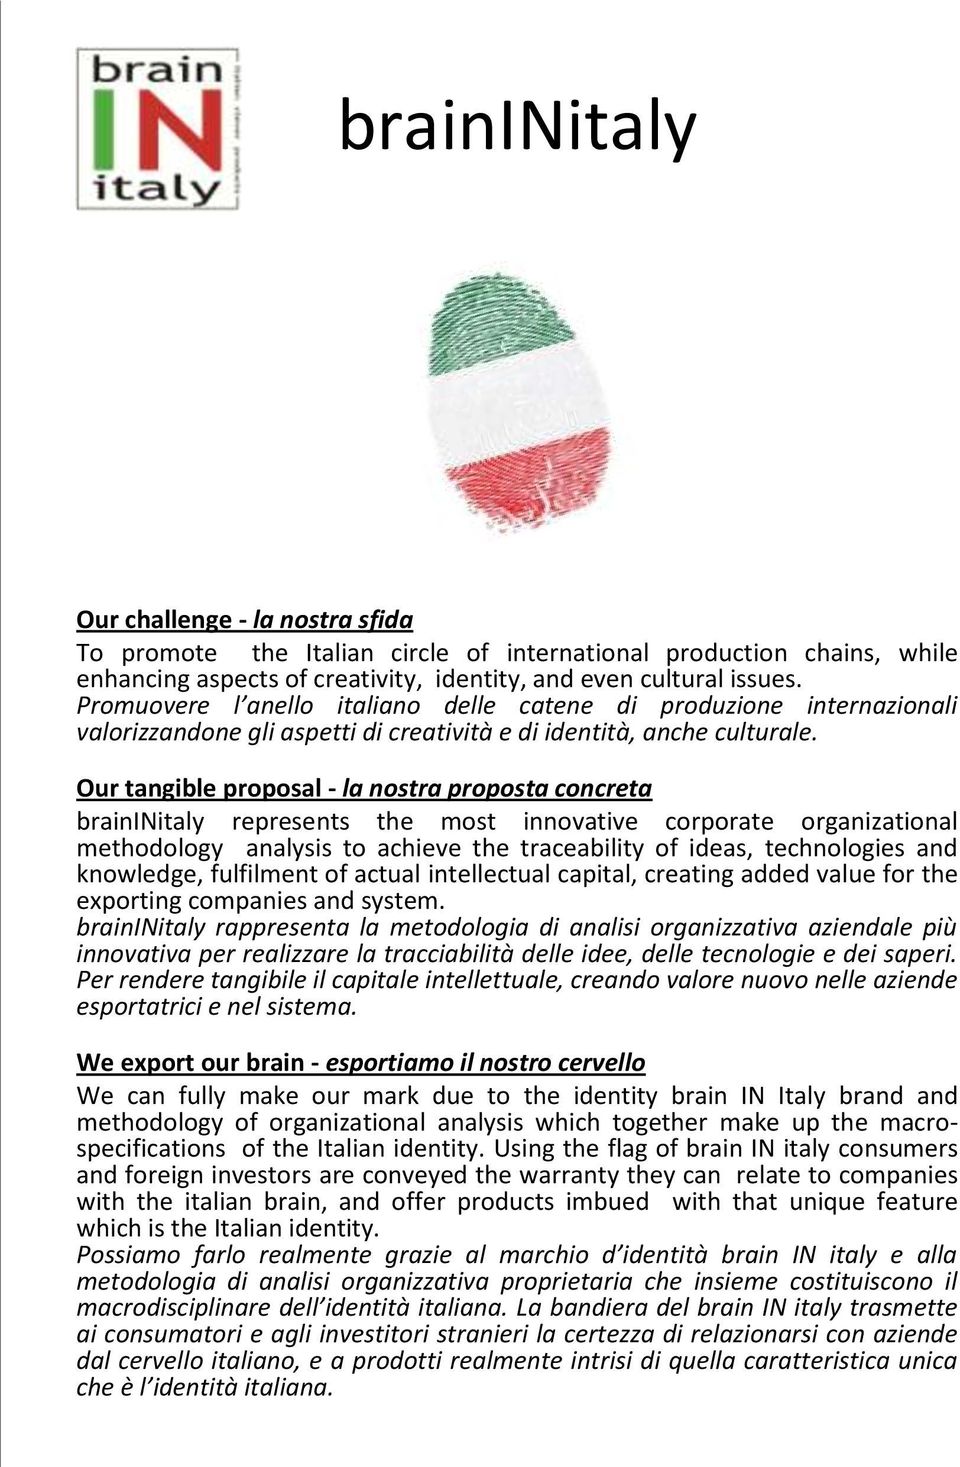 Our tangible proposal - la nostra proposta concreta braininitaly represents the most innovative corporate organizational methodology analysis to achieve the traceability of ideas, technologies and